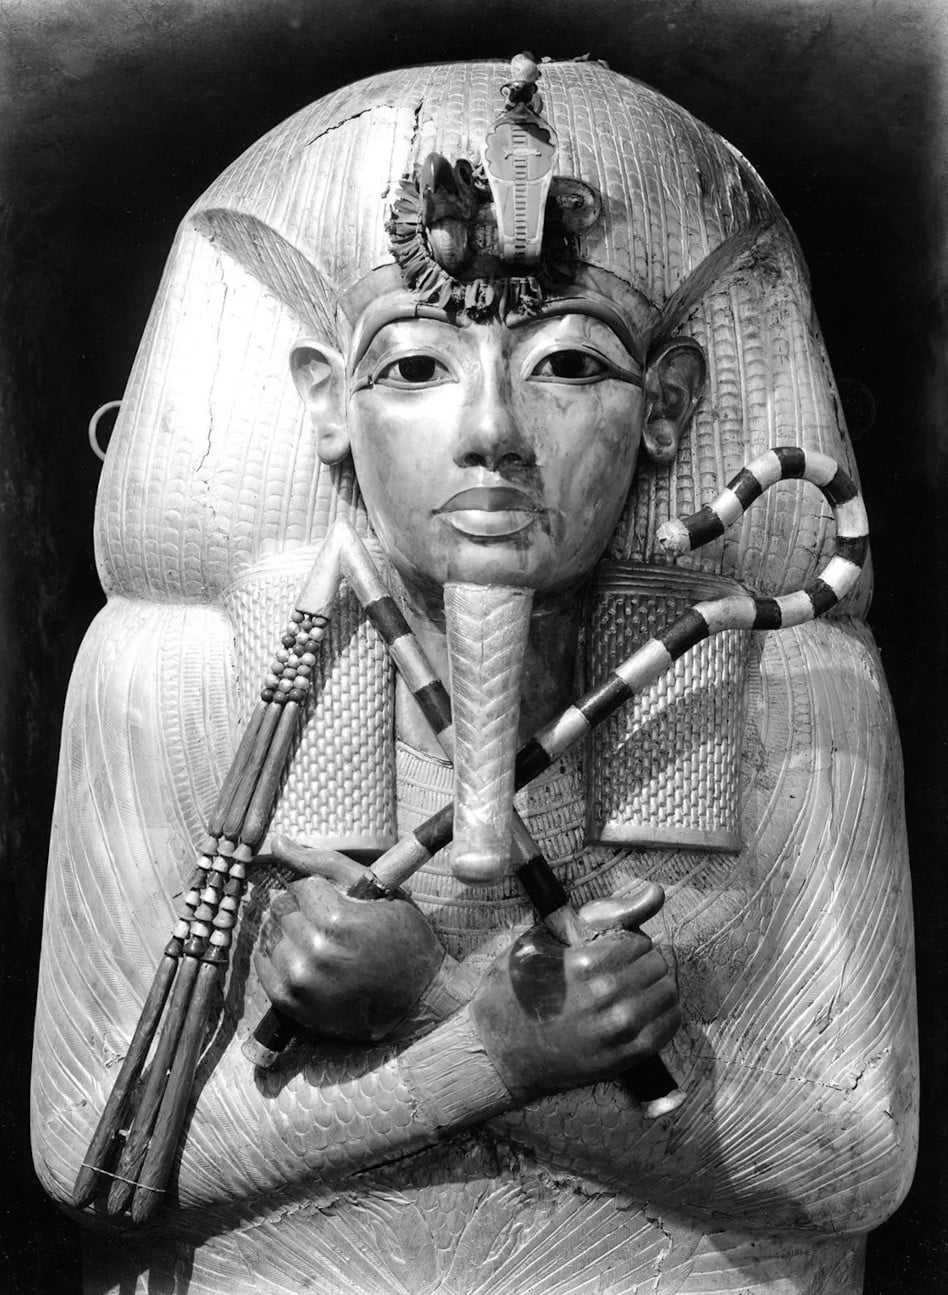 The face of Tutankhamun on the outer coffin.